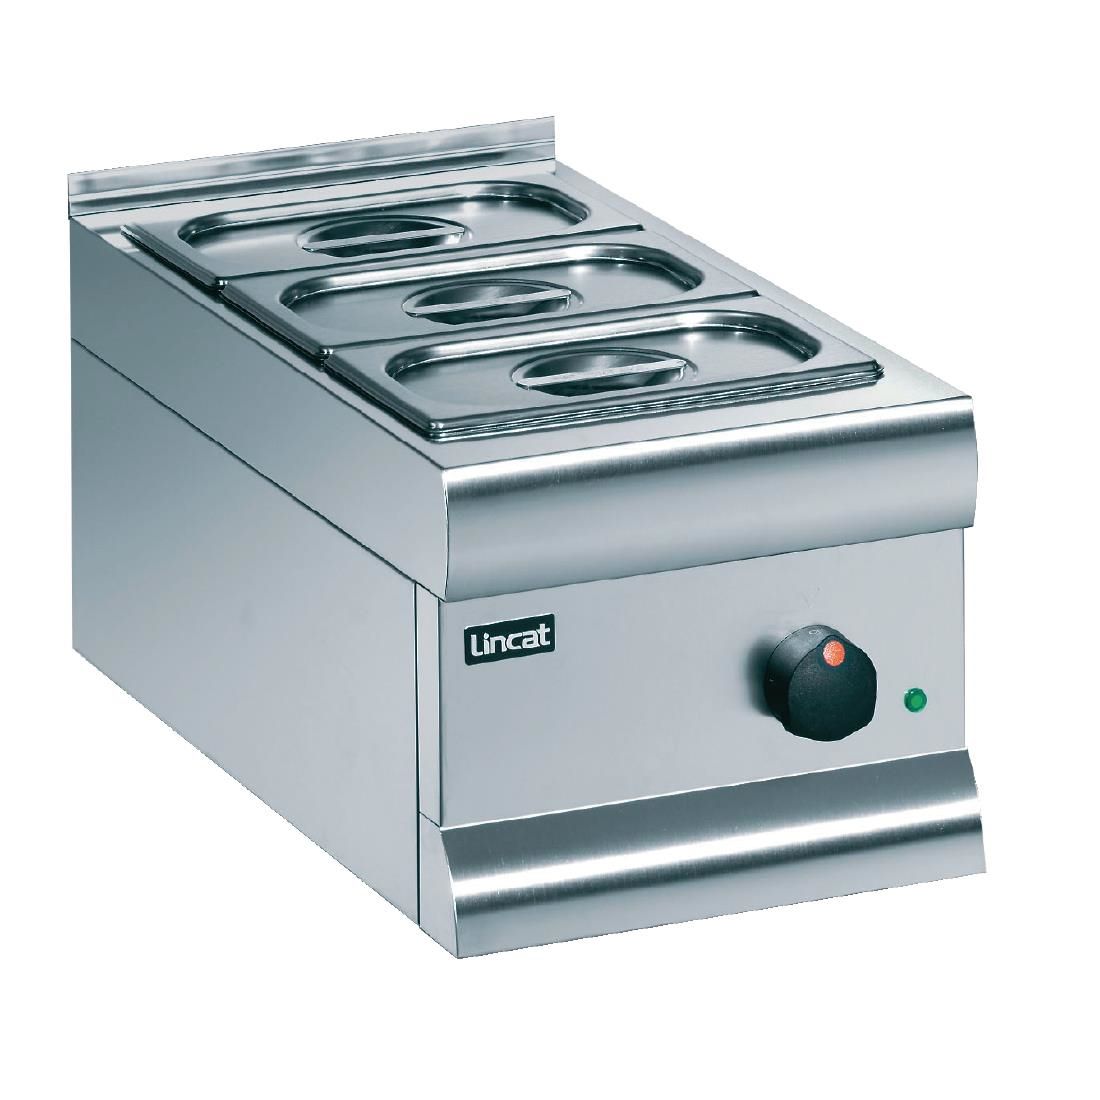 BM3A - Lincat Silverlink 600 Electric Counter-top Bain Marie - Dry Heat - Gastronorms - Base + Dish Pack - W 300 mm - 0.5 kW JD Catering Equipment Solutions Ltd